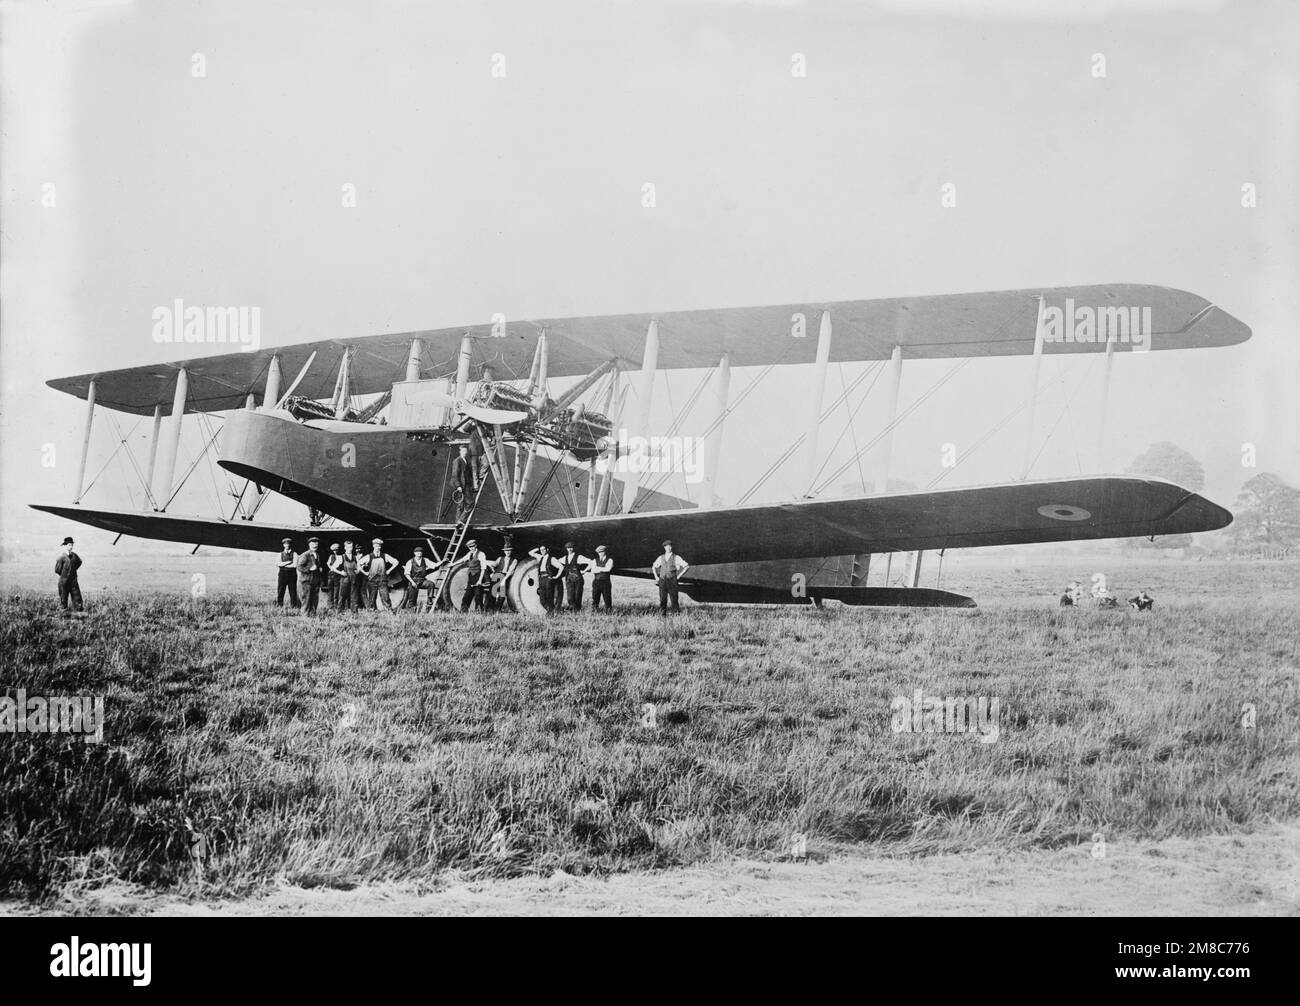 Vintage photo circa 1918 of a British Handley Page V/1500 heavy bomber during world war one. Developed as a heavy night bomber it first flew on May 22 1918 Stock Photo